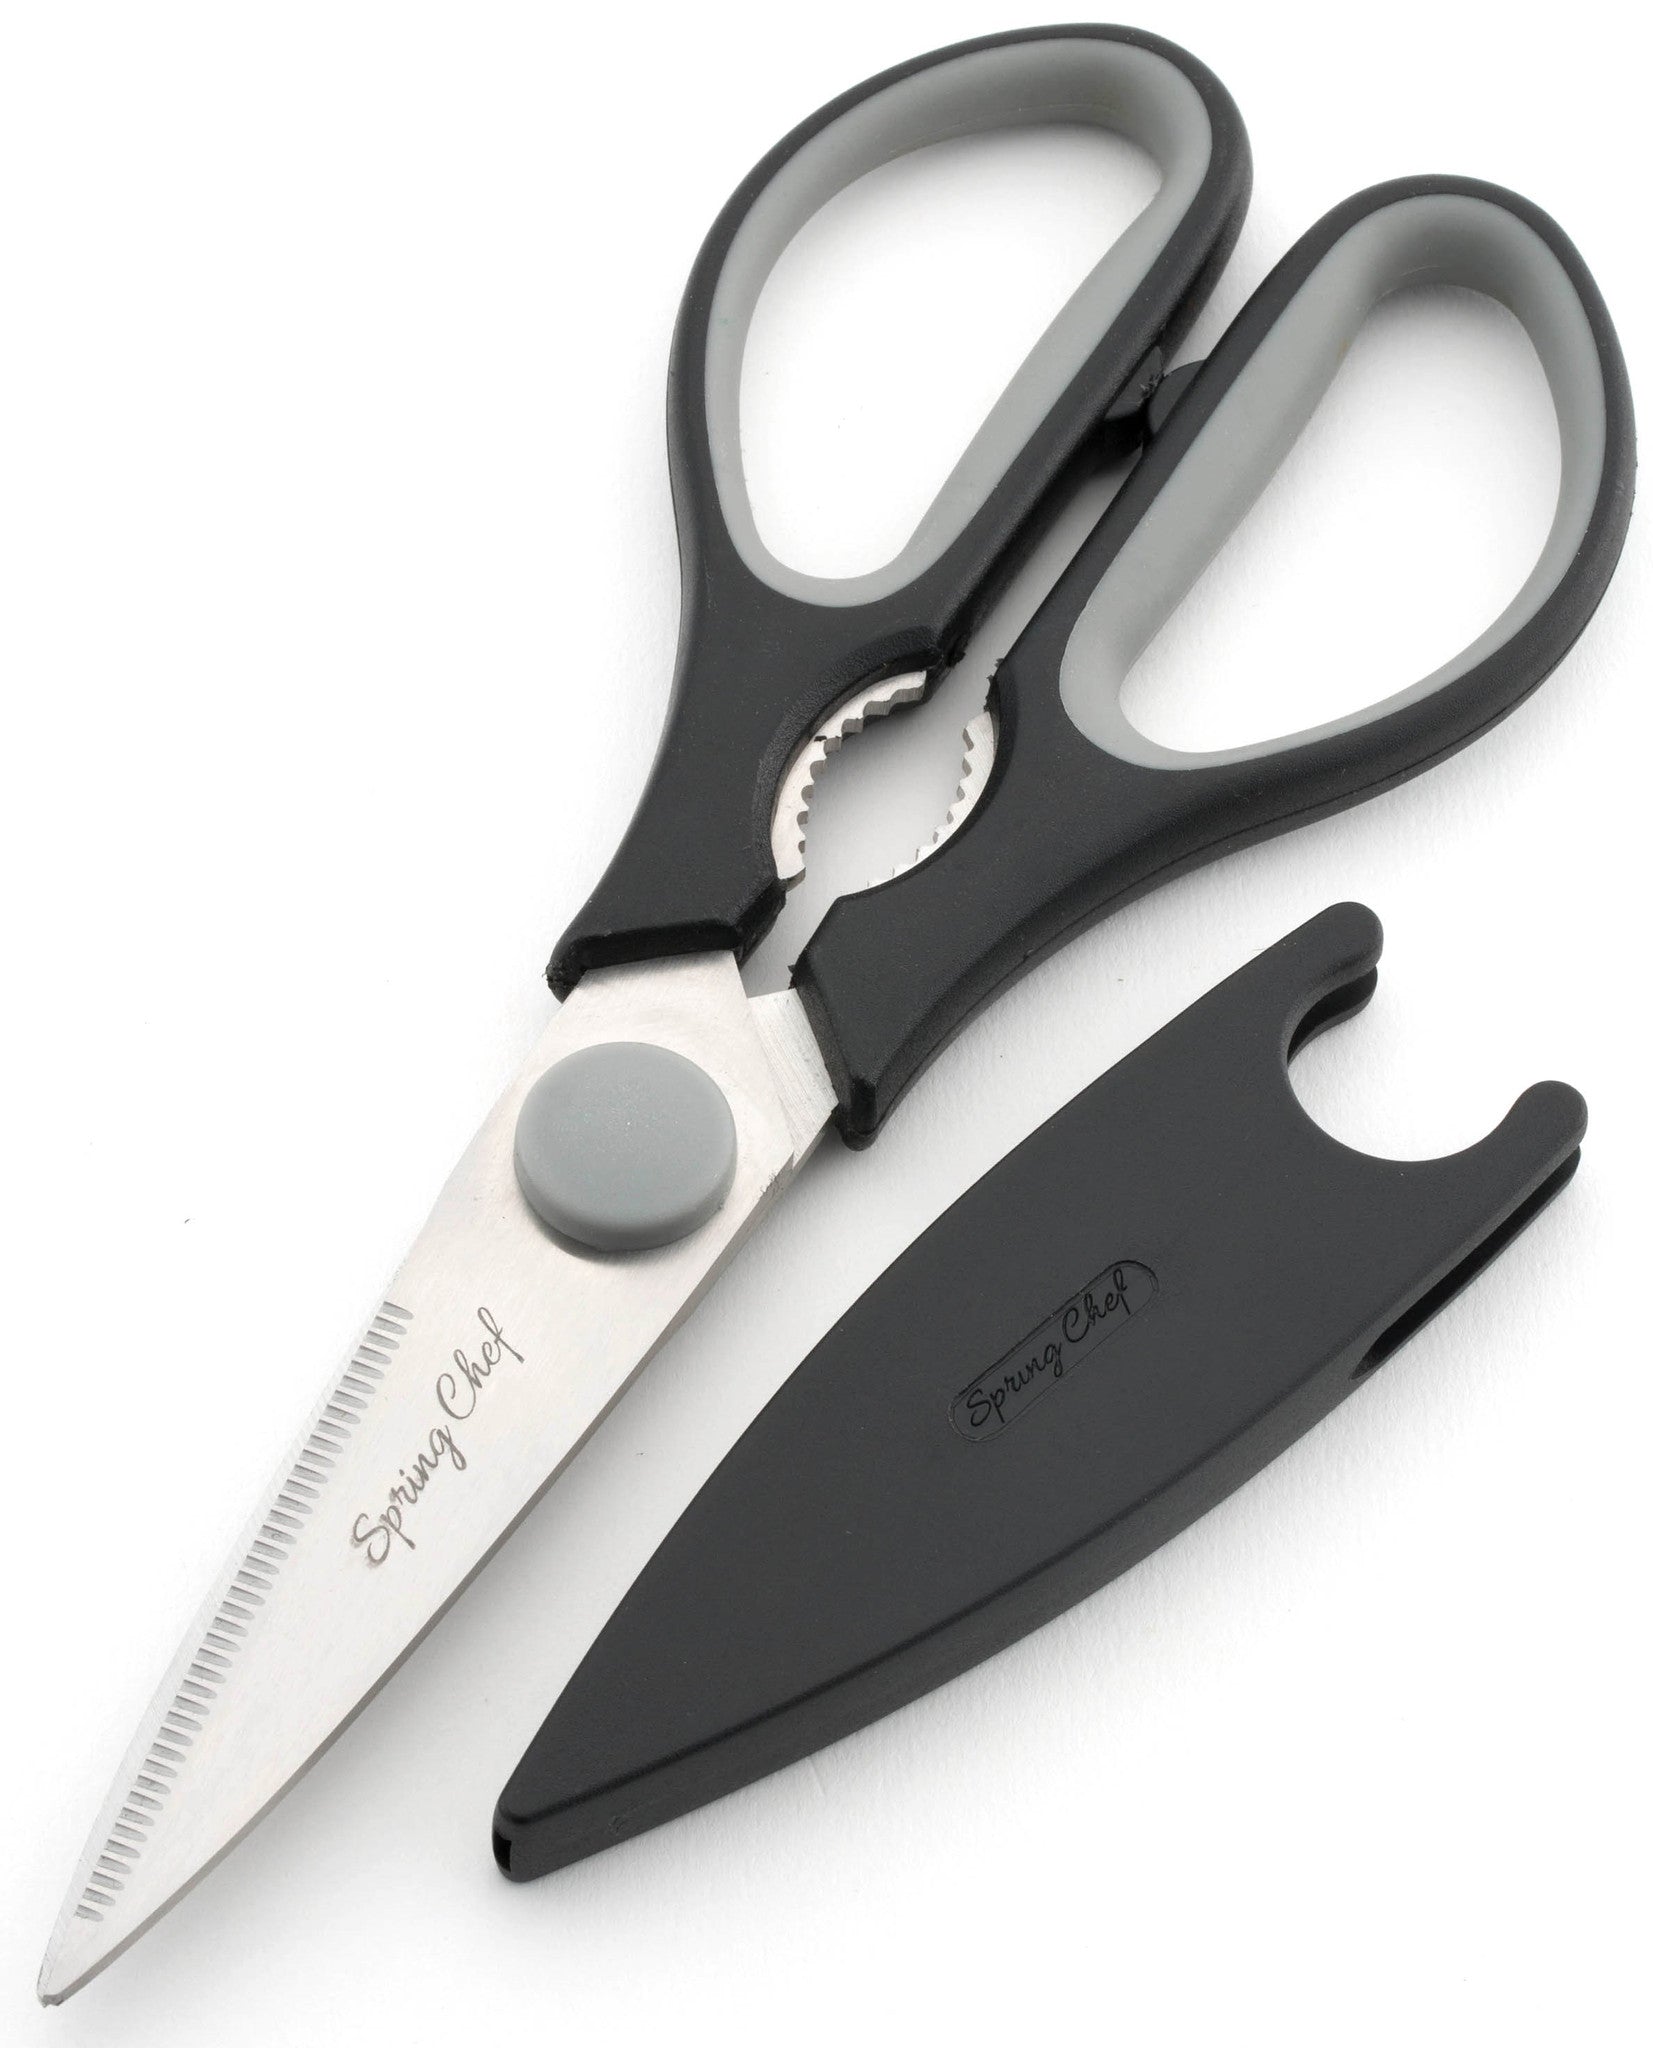 Come Apart Kitchen Scissors - Great Shears for Meat